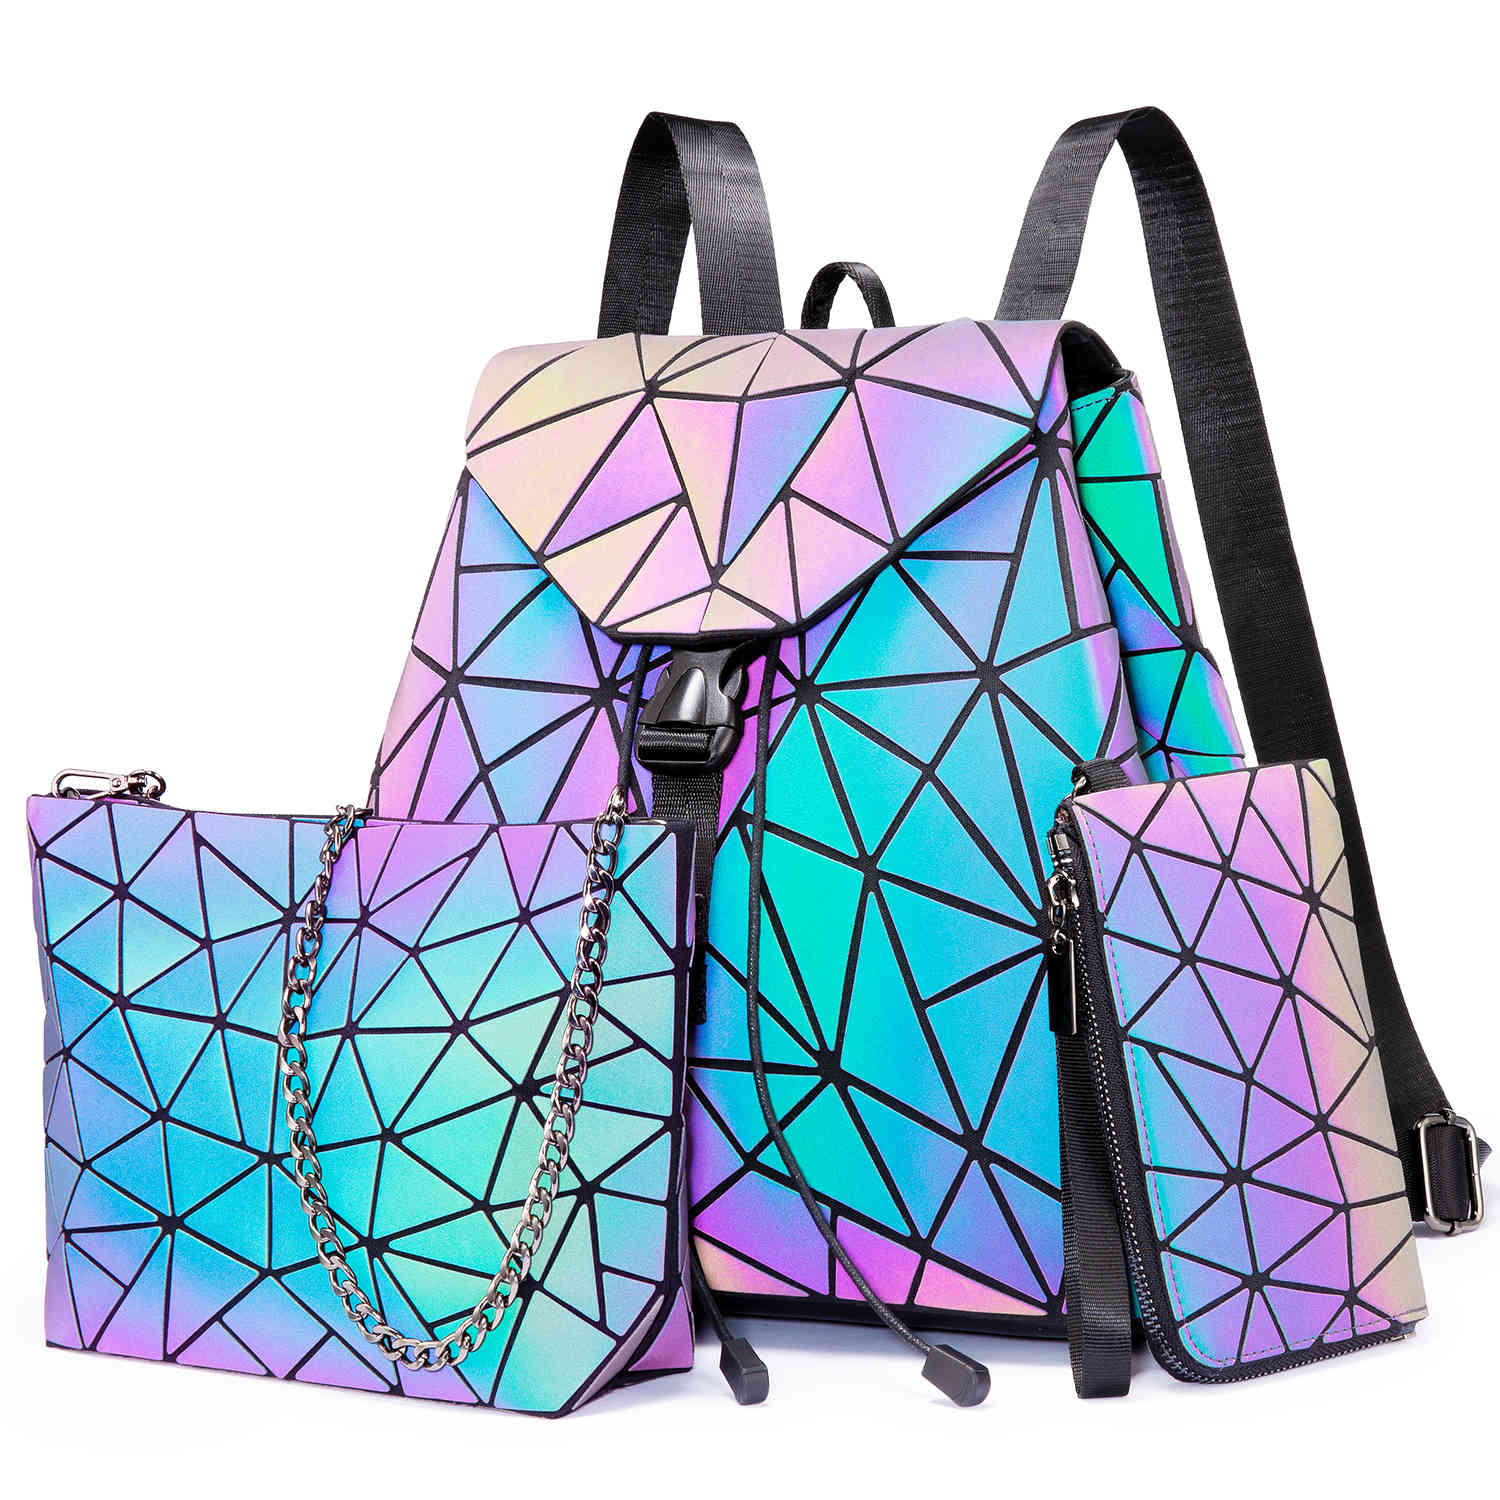 PYFK Geometric Backpack Luminous Holographic Purse Color Changes Flash  Reflective Bag For Cycling Fashion Sling Bag for Women(Prism)